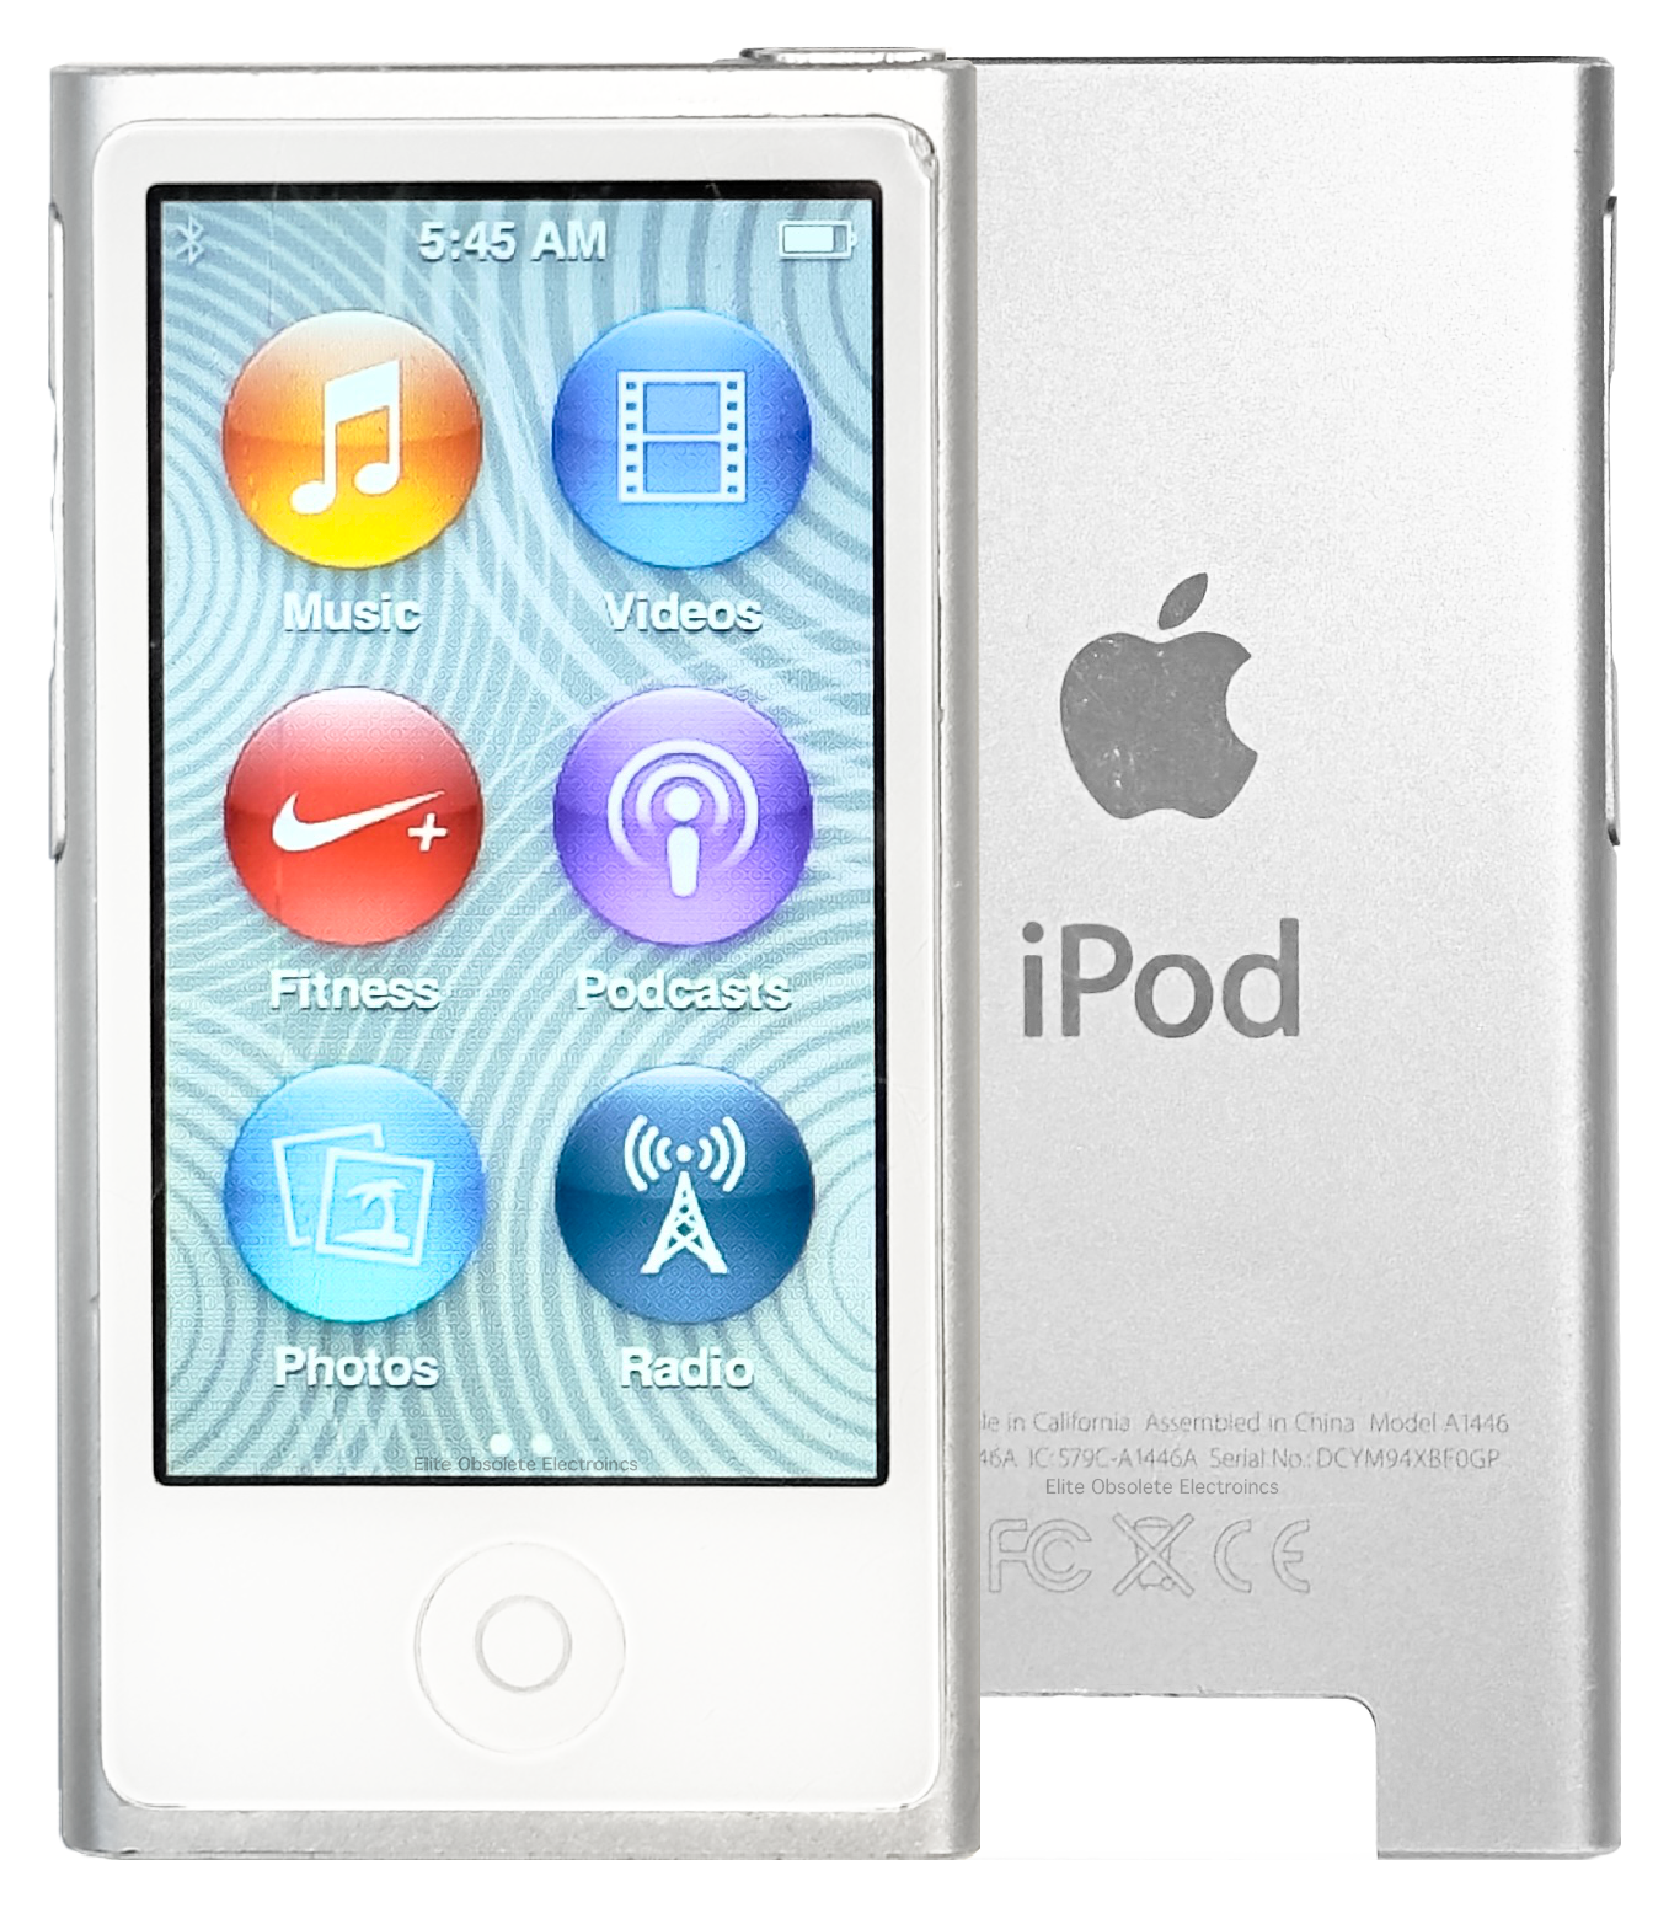 Refurbished Apple iPod Nano 7th Generation 16GB Silver & White MKN22LL/A A1446 New Battery